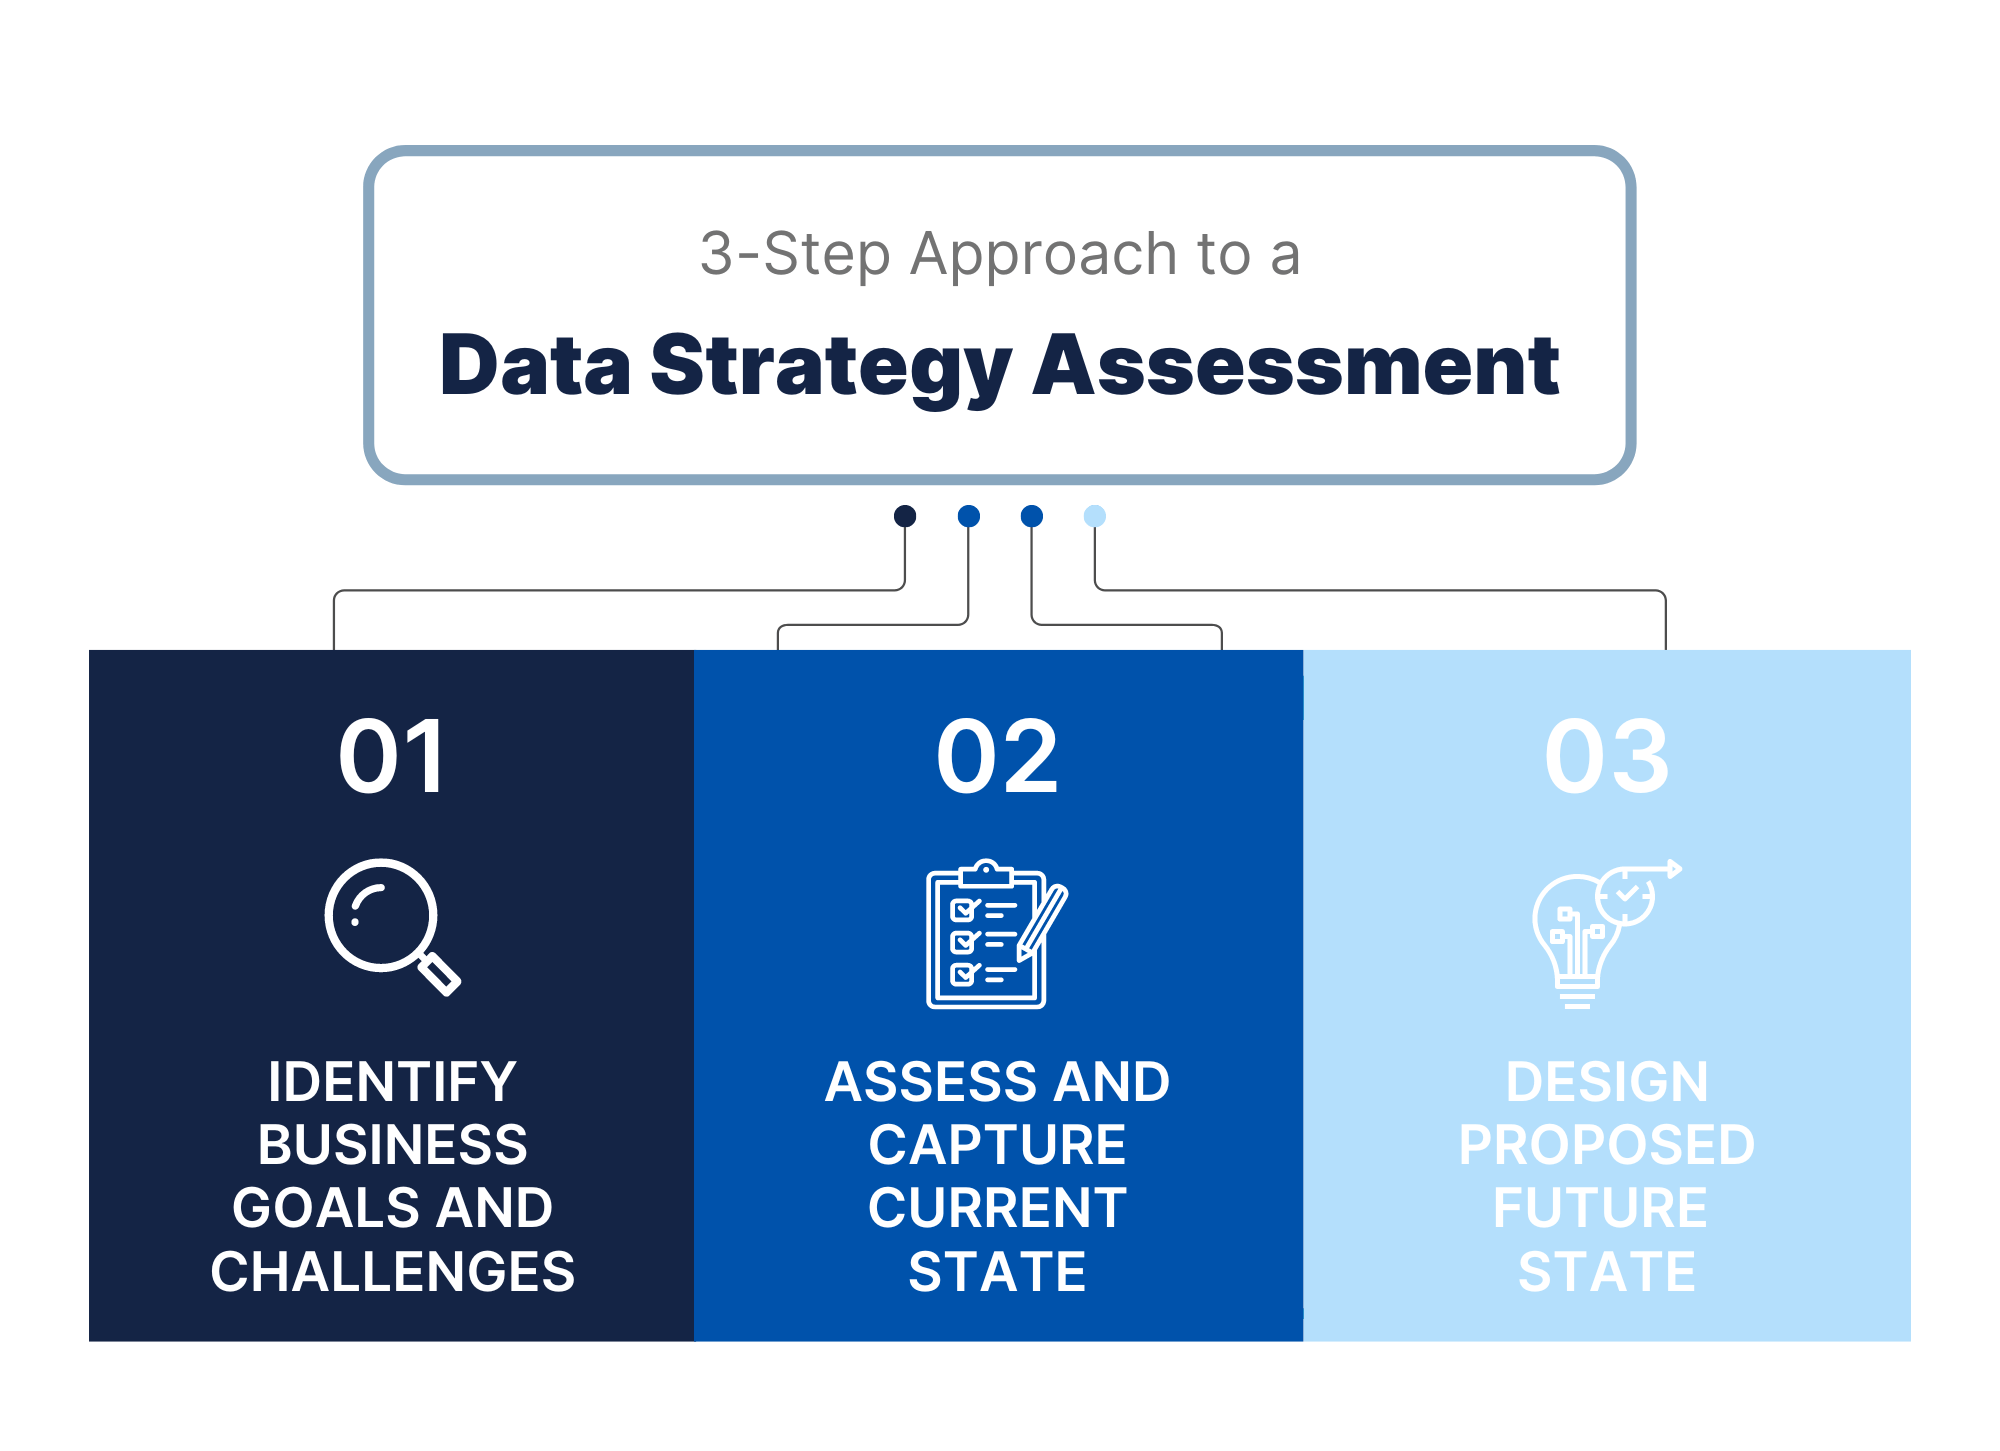 Three blue colored boxes aligned horizontally represent three steps to a data strategy assessment: identify business goals and challenges, assess and capture current state, design proposed future state. Above each box includes a white icon and number for the step. 